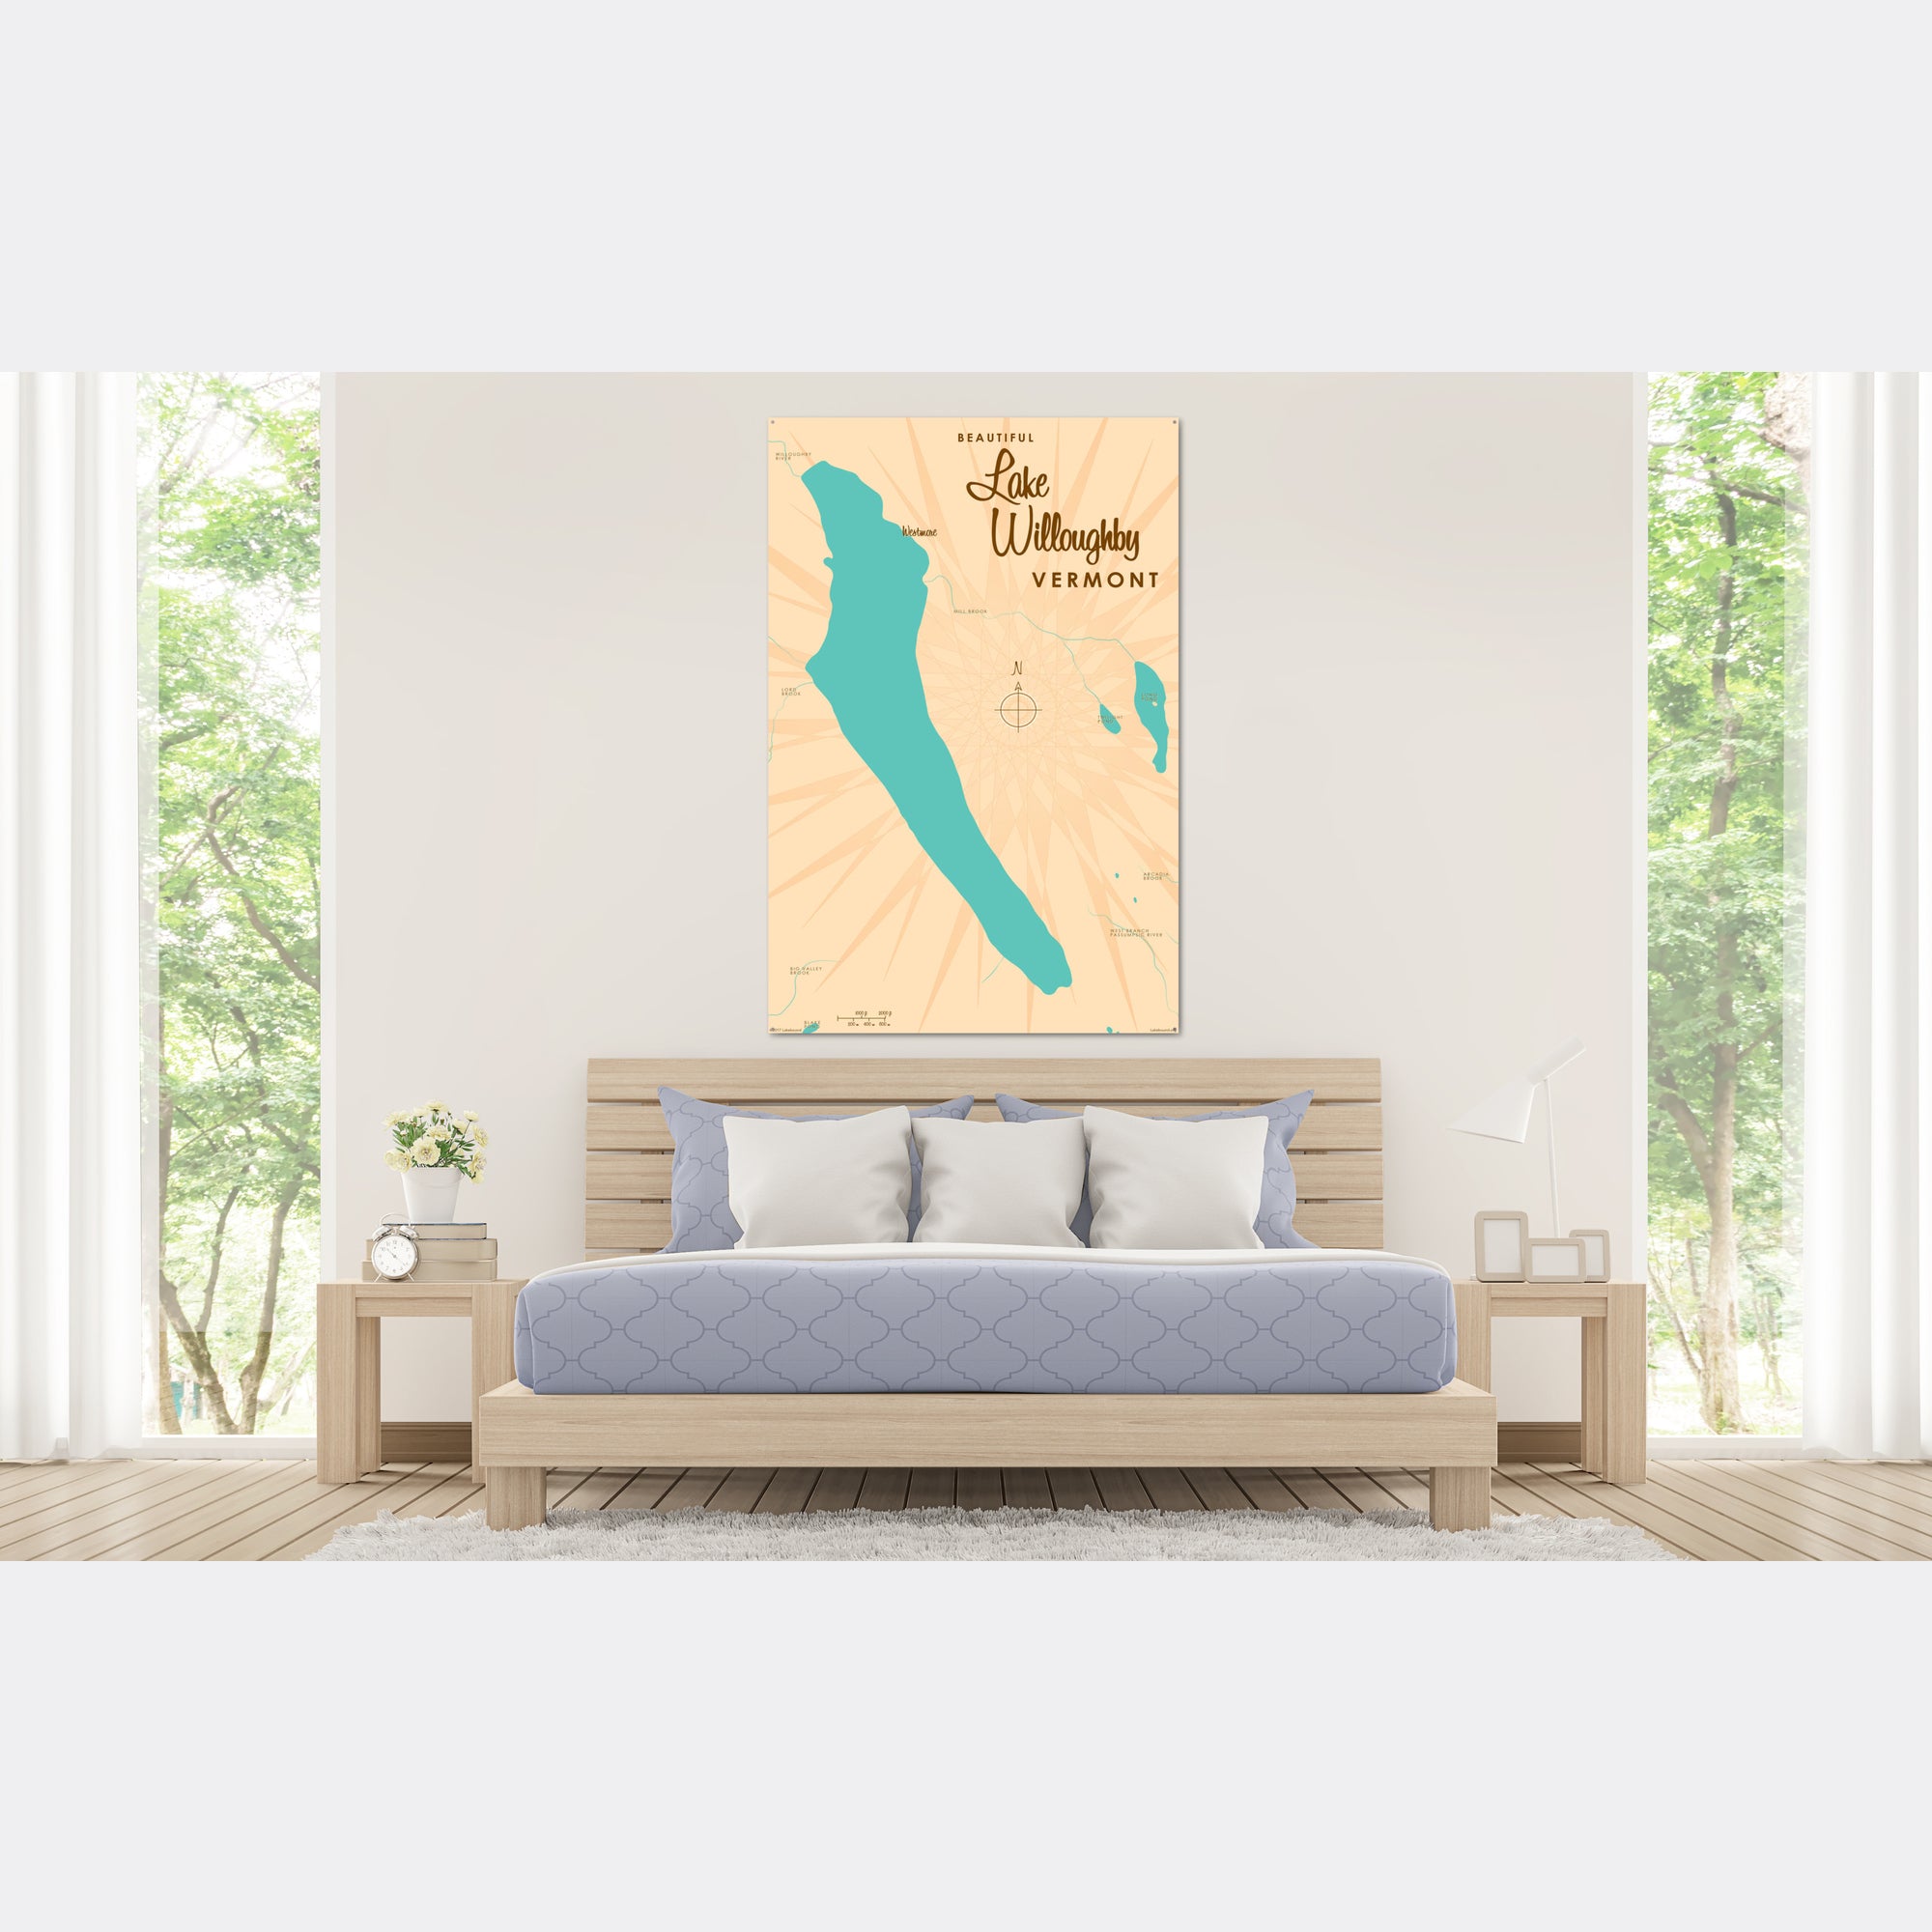 Lake Willoughby Vermont, Metal Sign Map Art